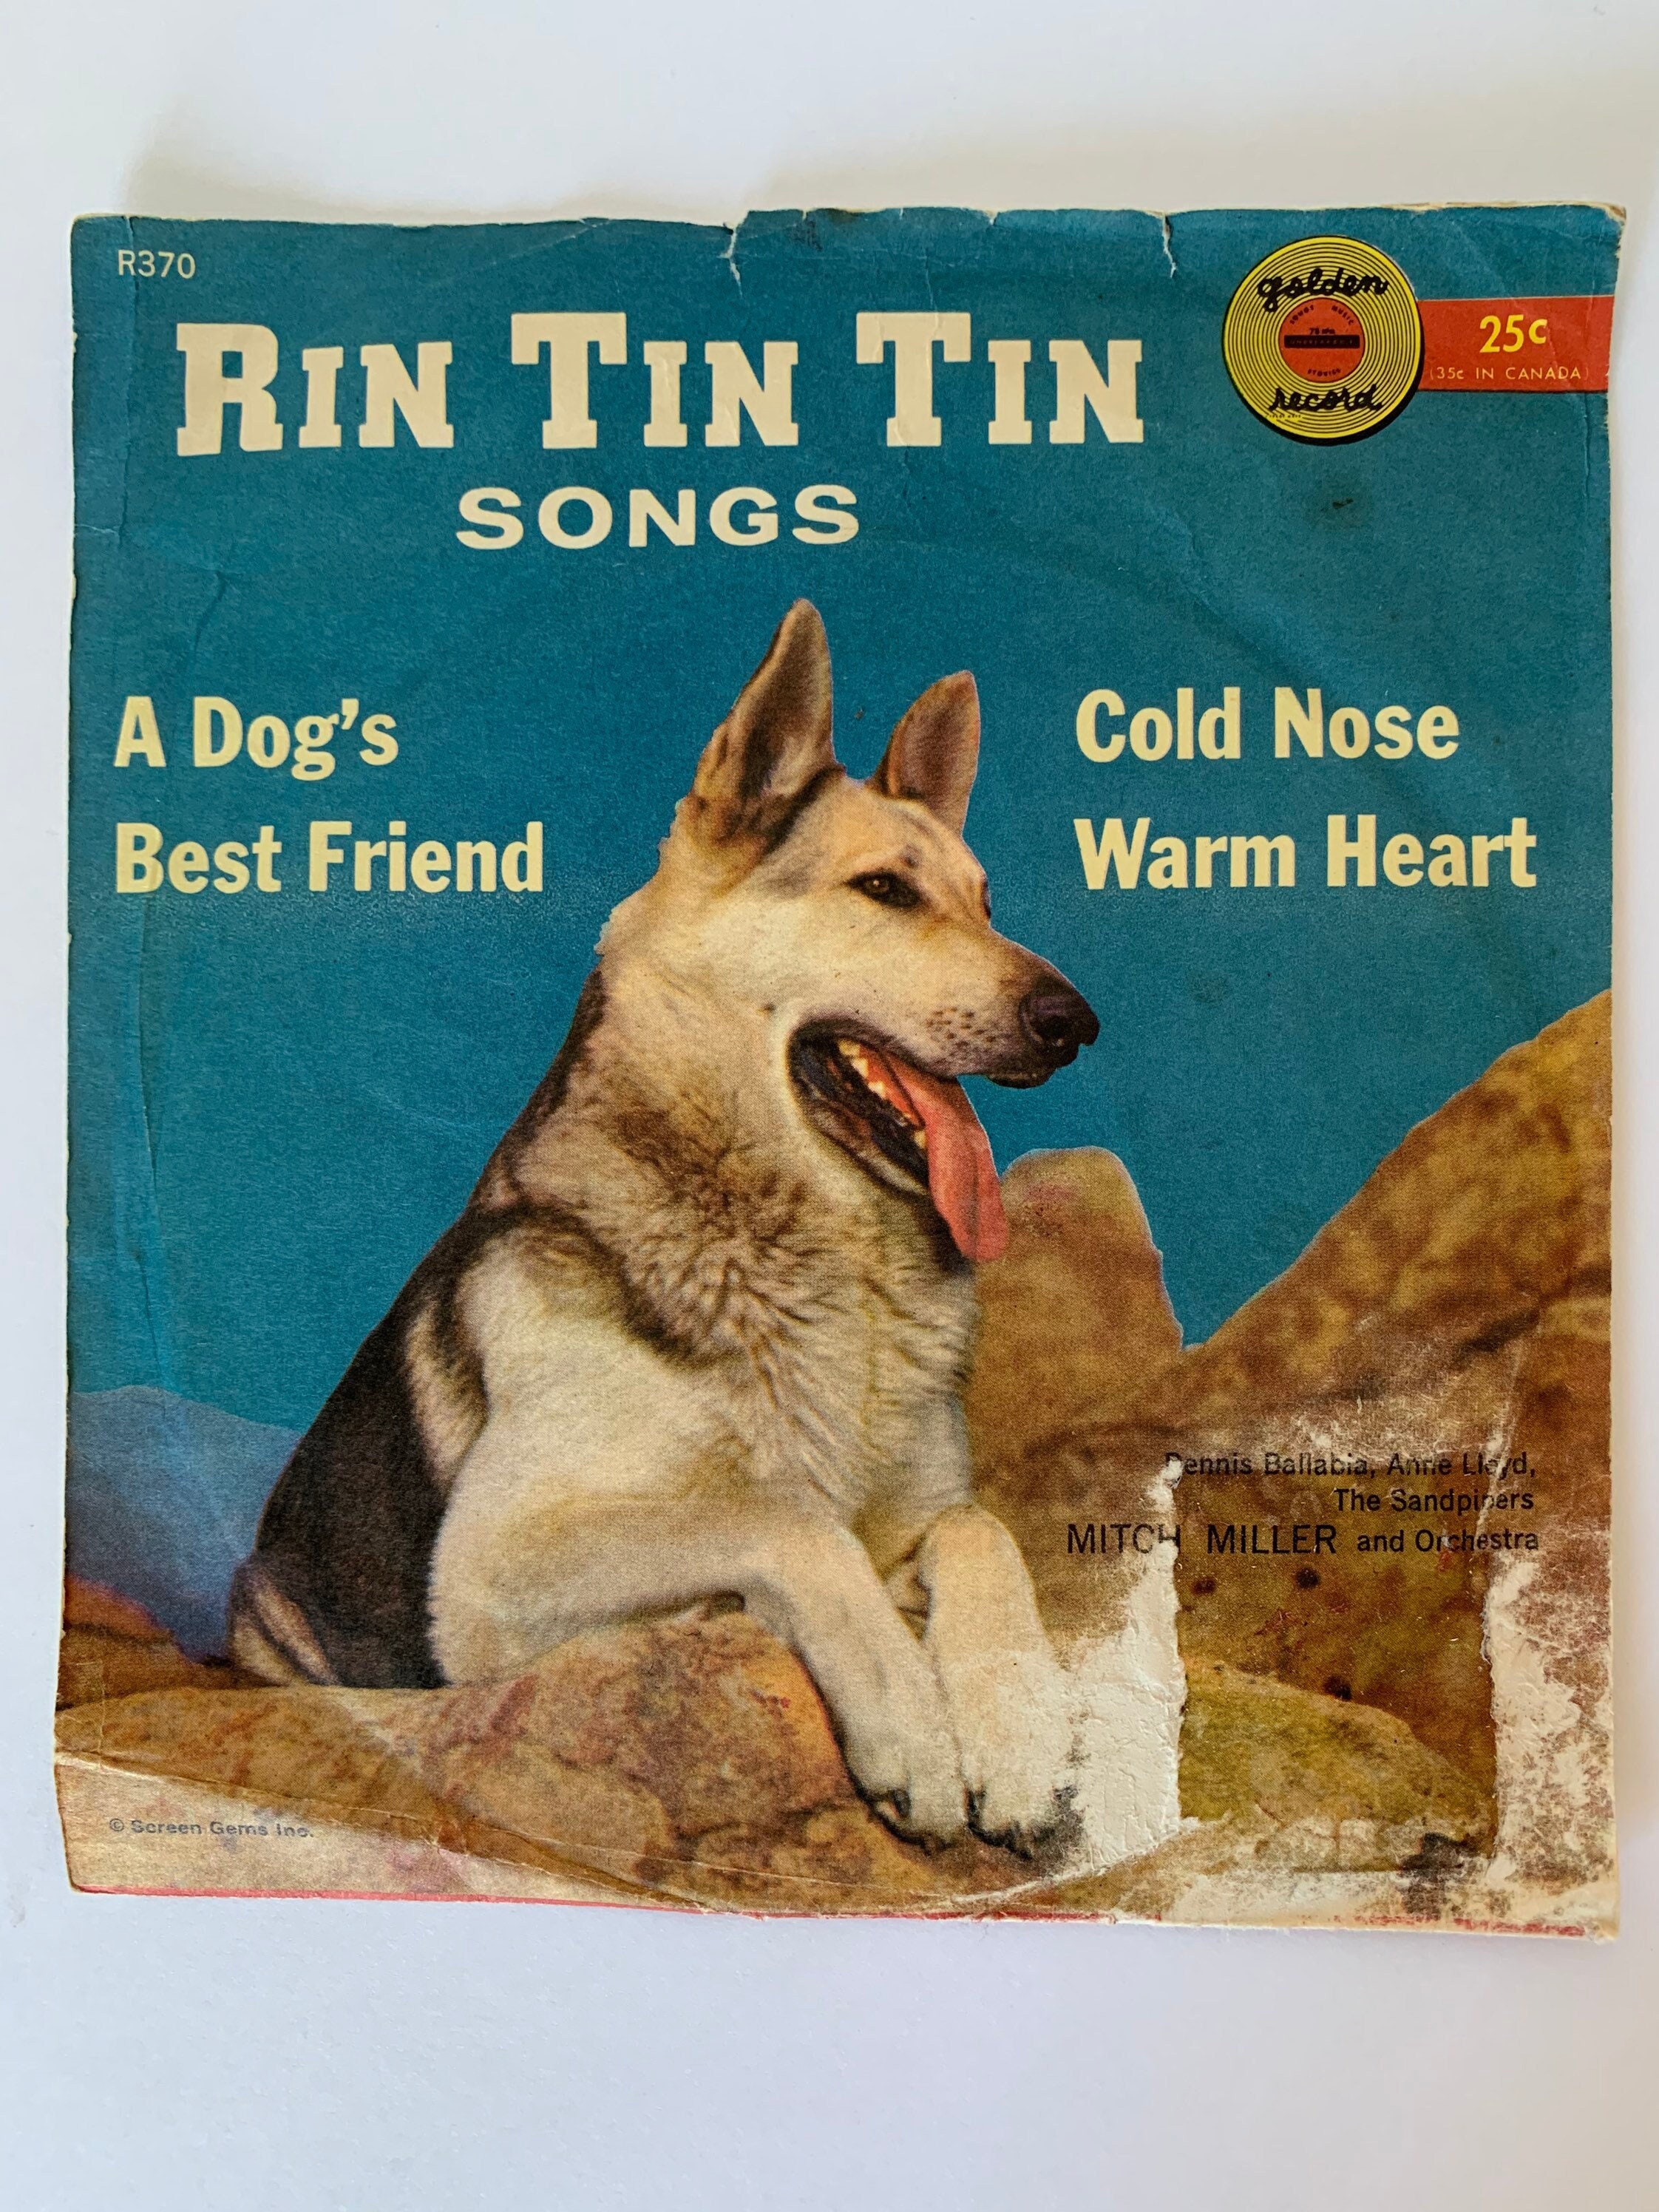 Frustration Afrika Feasibility Vintage Rare Rin Tin Tin Songs Vinyl Record A Dogs Best - Etsy